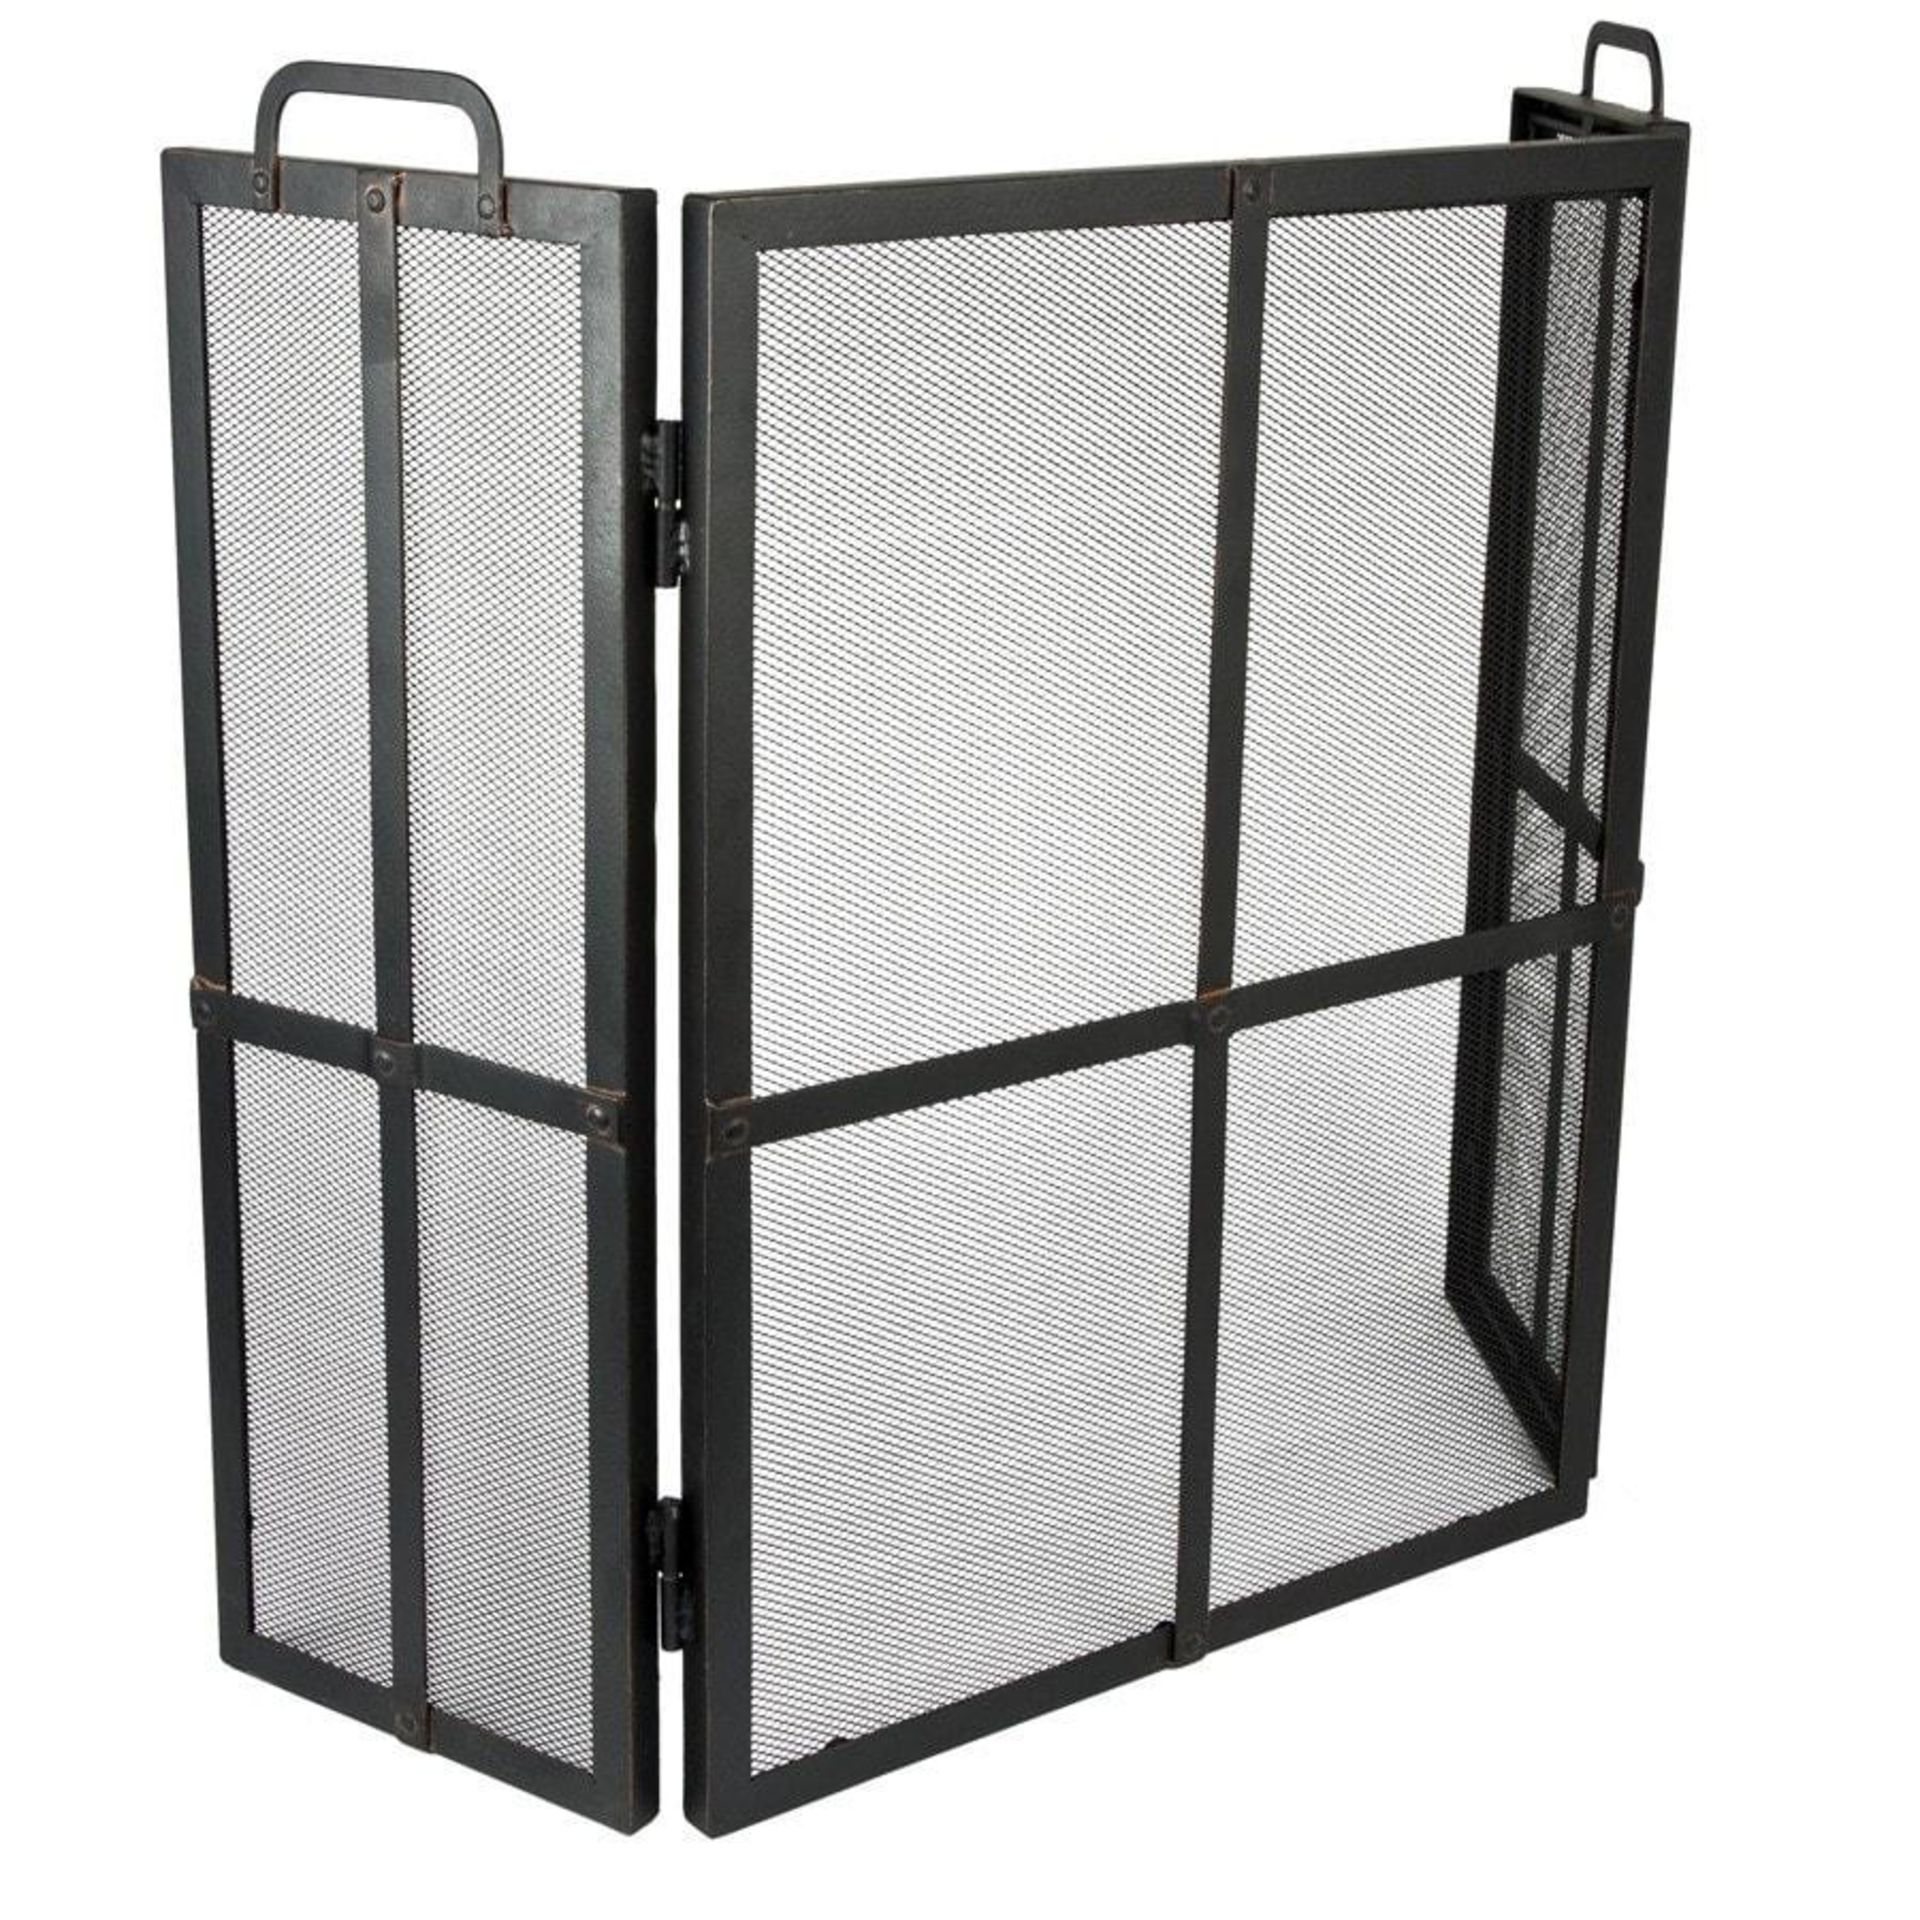 1 X BOXED IVORY LINE IRON FIRE SCREEN SURROUND RRP £130 28.11.17 4240296 W127